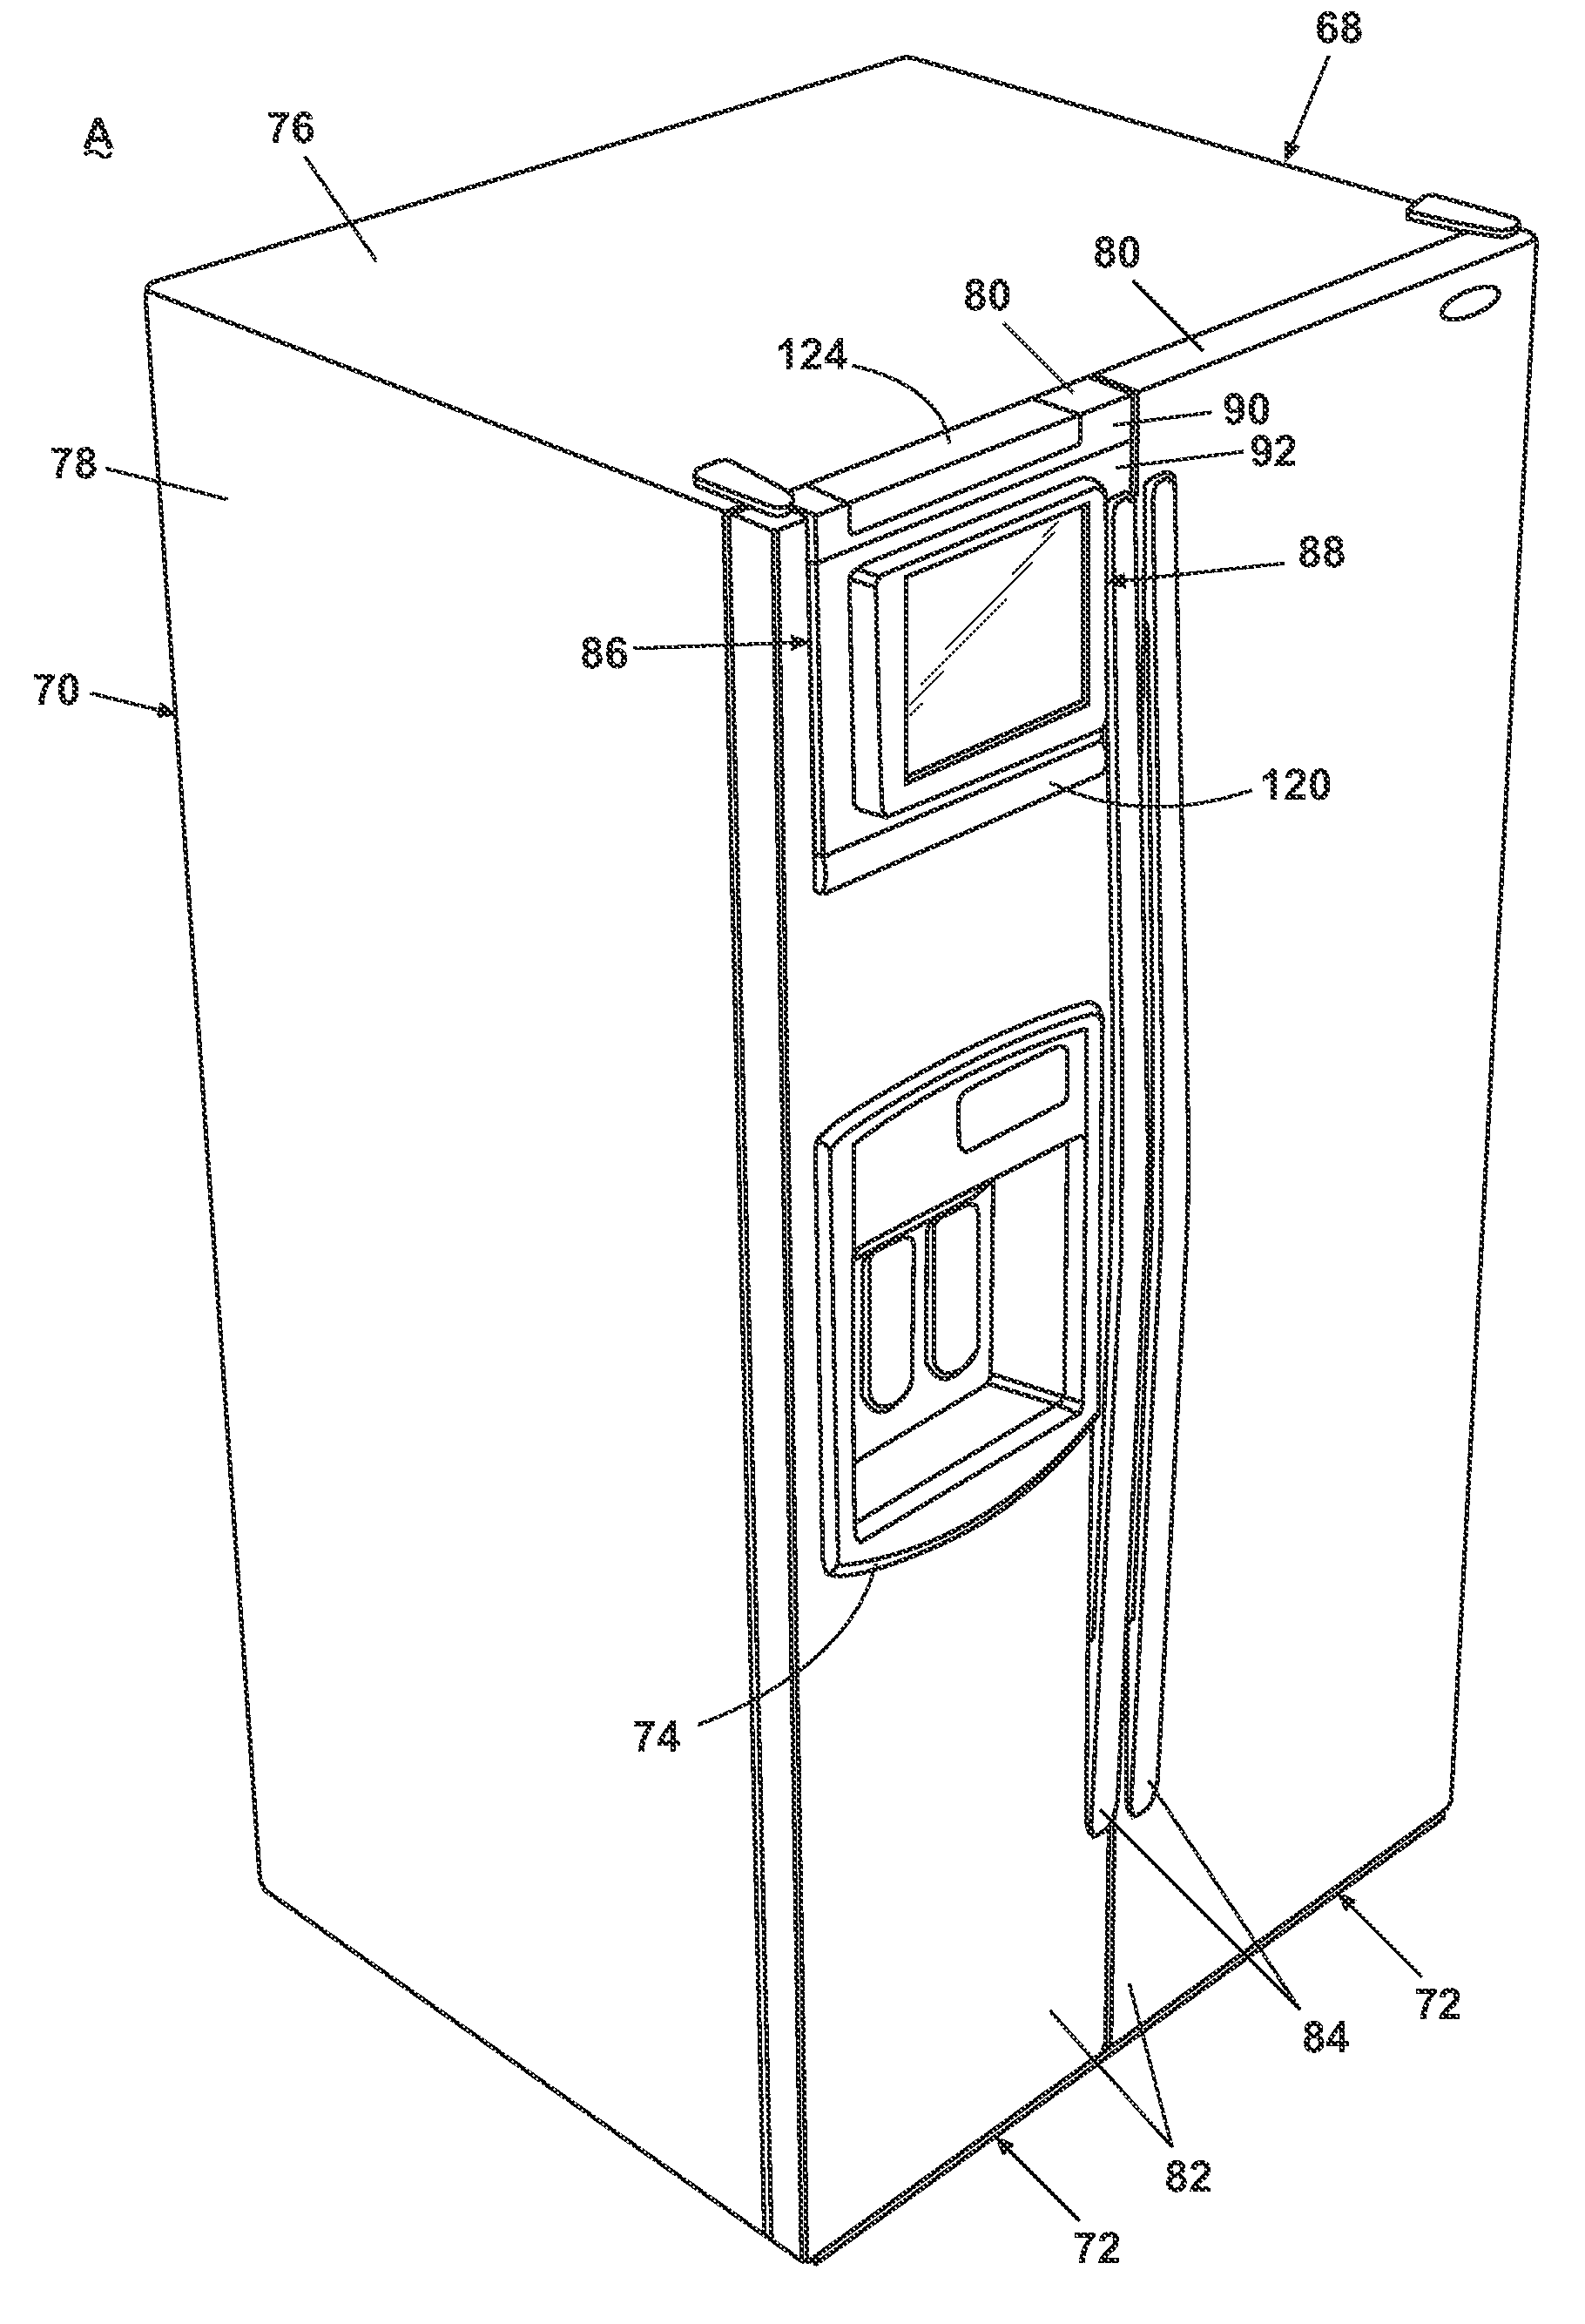 Appliance Door With a Service Interface